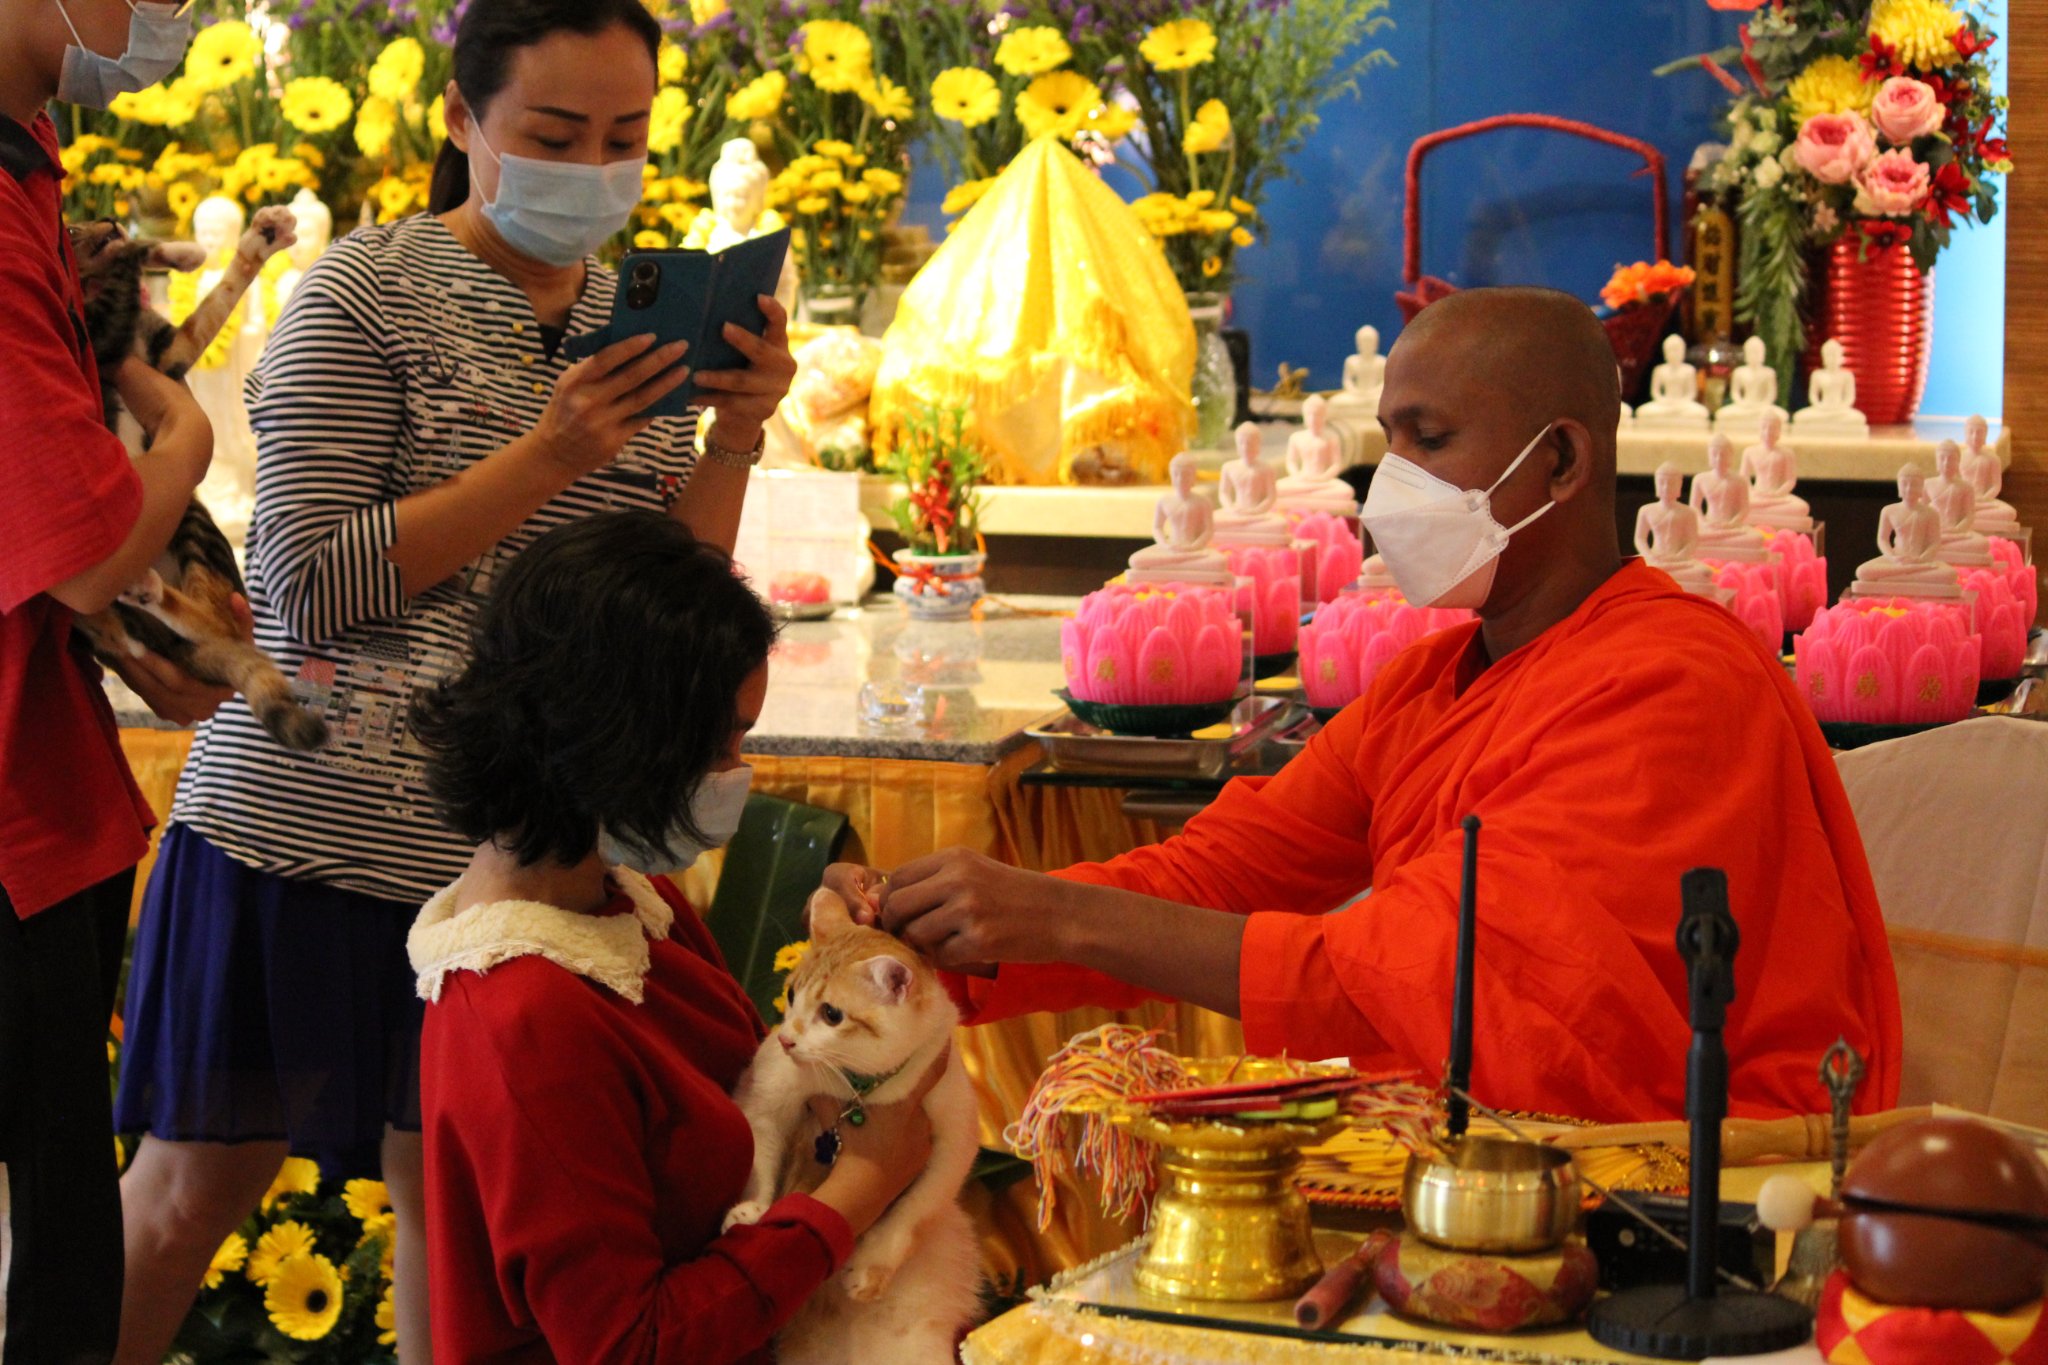 Wesak day celebrations to return in full swing after 3 years of covid restrictions